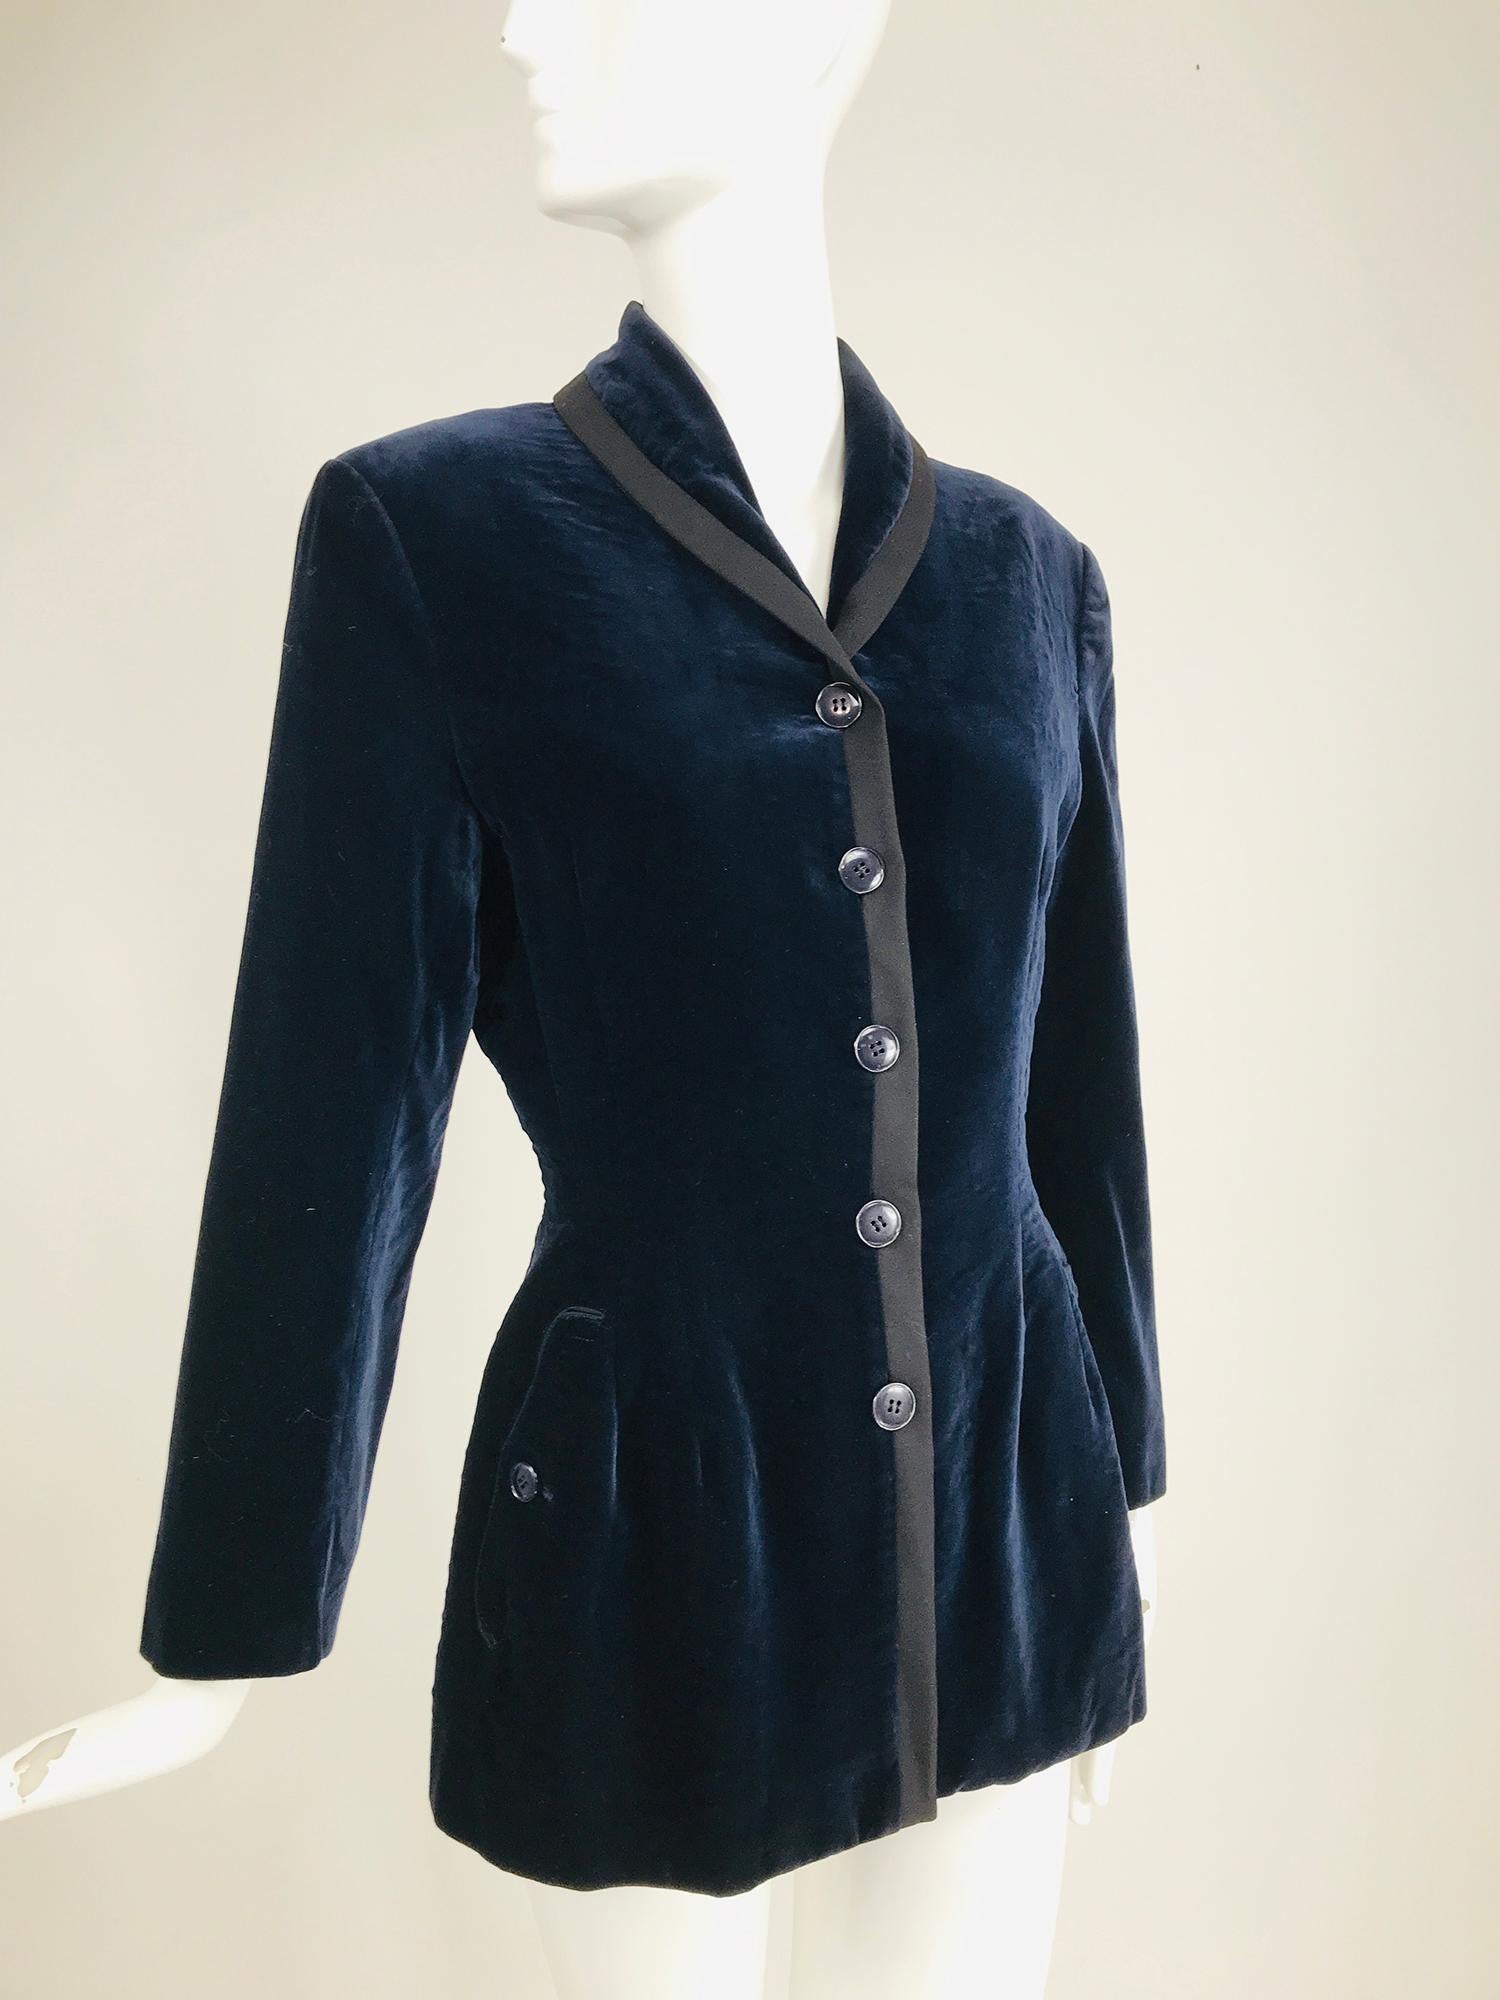  Azzedine Alaïa blue velvet fitted frock style jacket from the 1980s. A beautiful jacket that references the 18th century men's style. Single breasted jacket in dark blue velvet, with a shawl collar, it buttons up high, with front facings trimmed